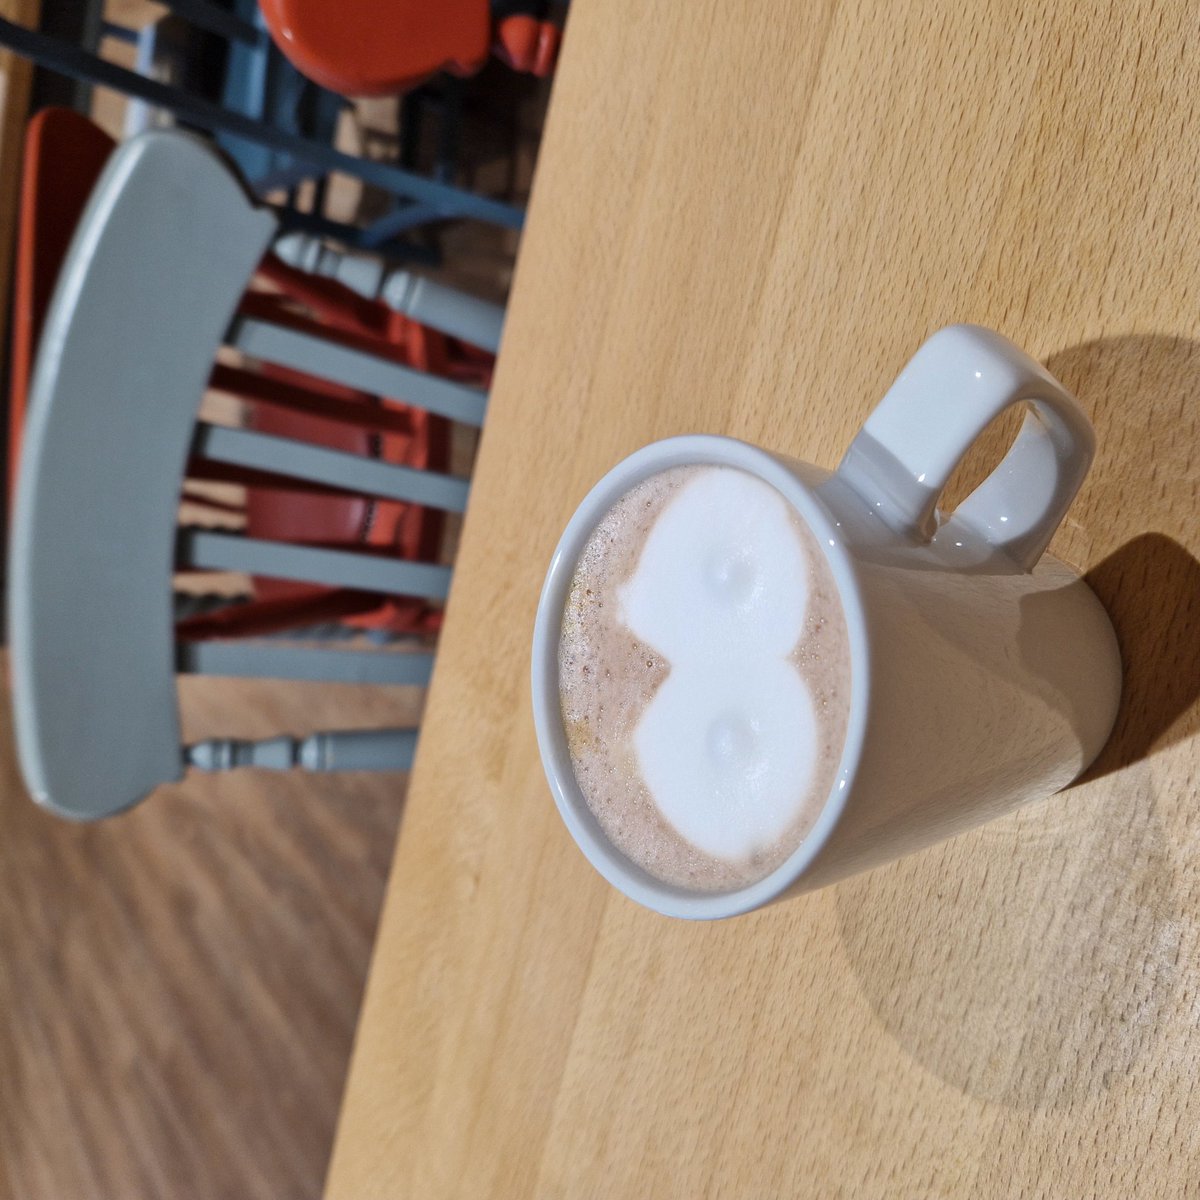 🤔 I know that making shapes in coffee is a popular thing to do, but I didn't expect this from Morrisons Cafe this morning. What does it look like to you? @morrisons